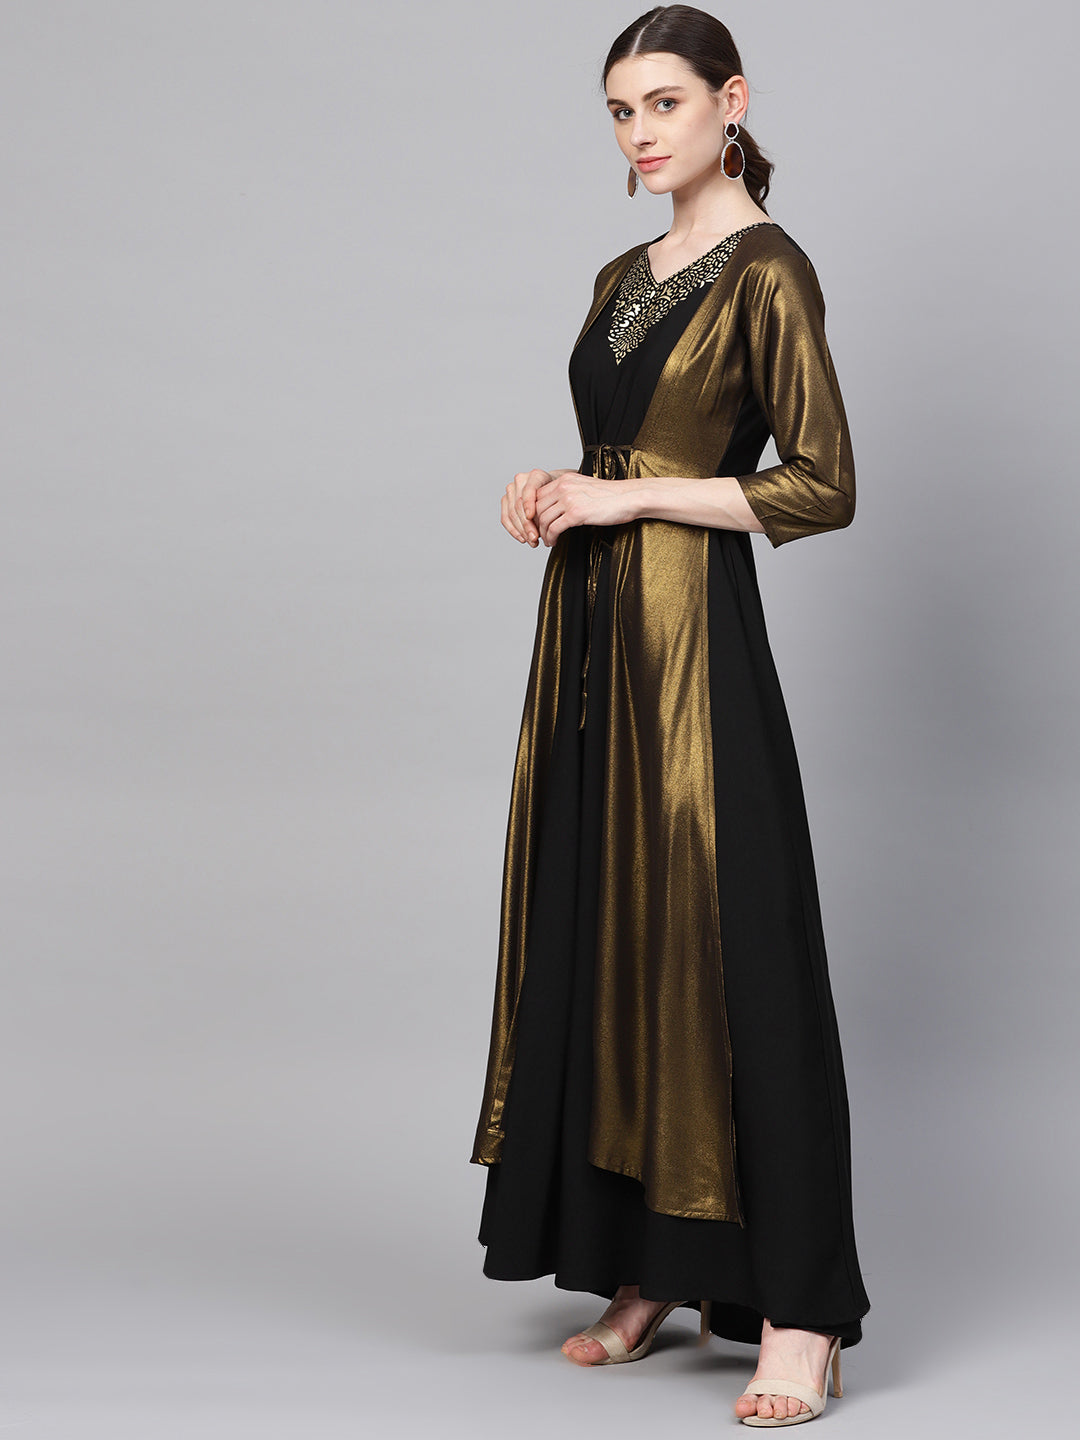 Women's Black Crepe Dress With Attached Jacket - Ahalyaa